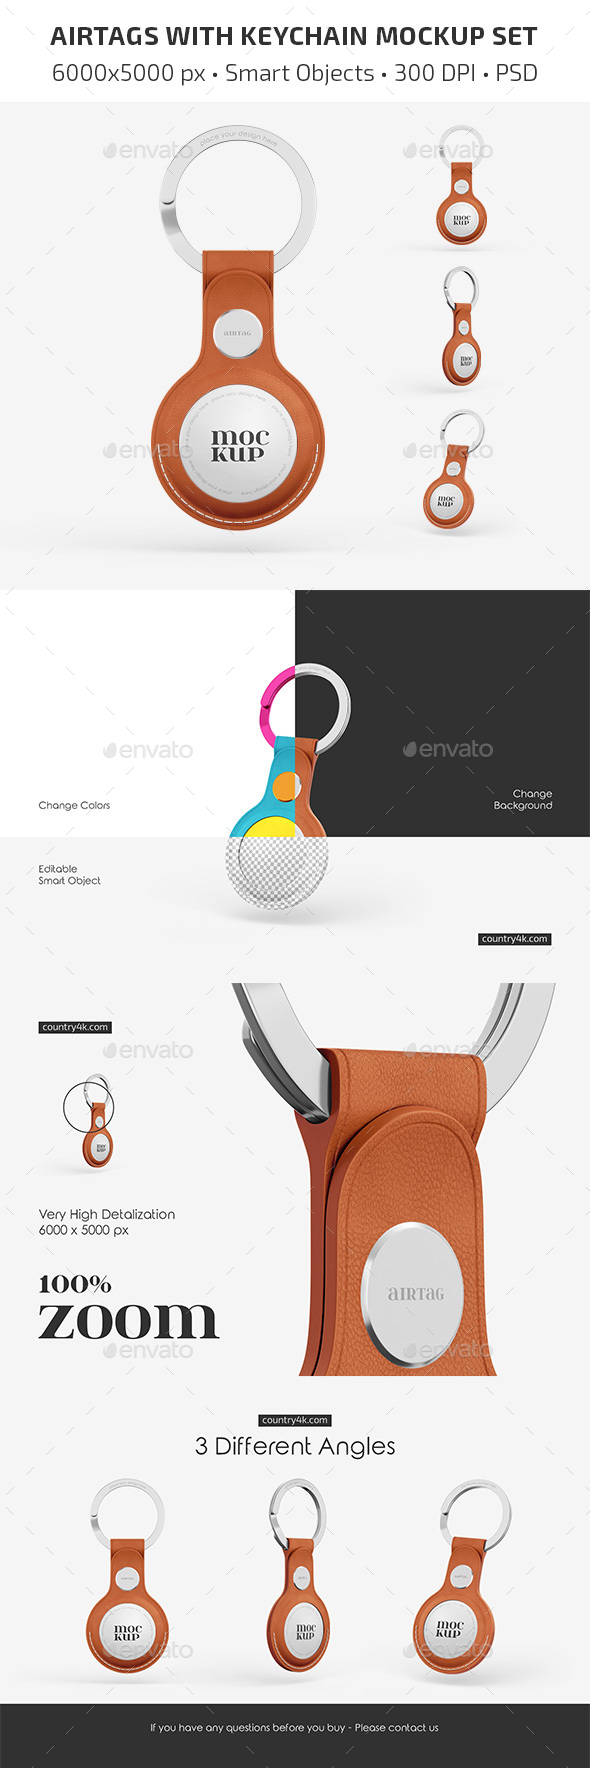 AirTags with Keychain Mockup Set